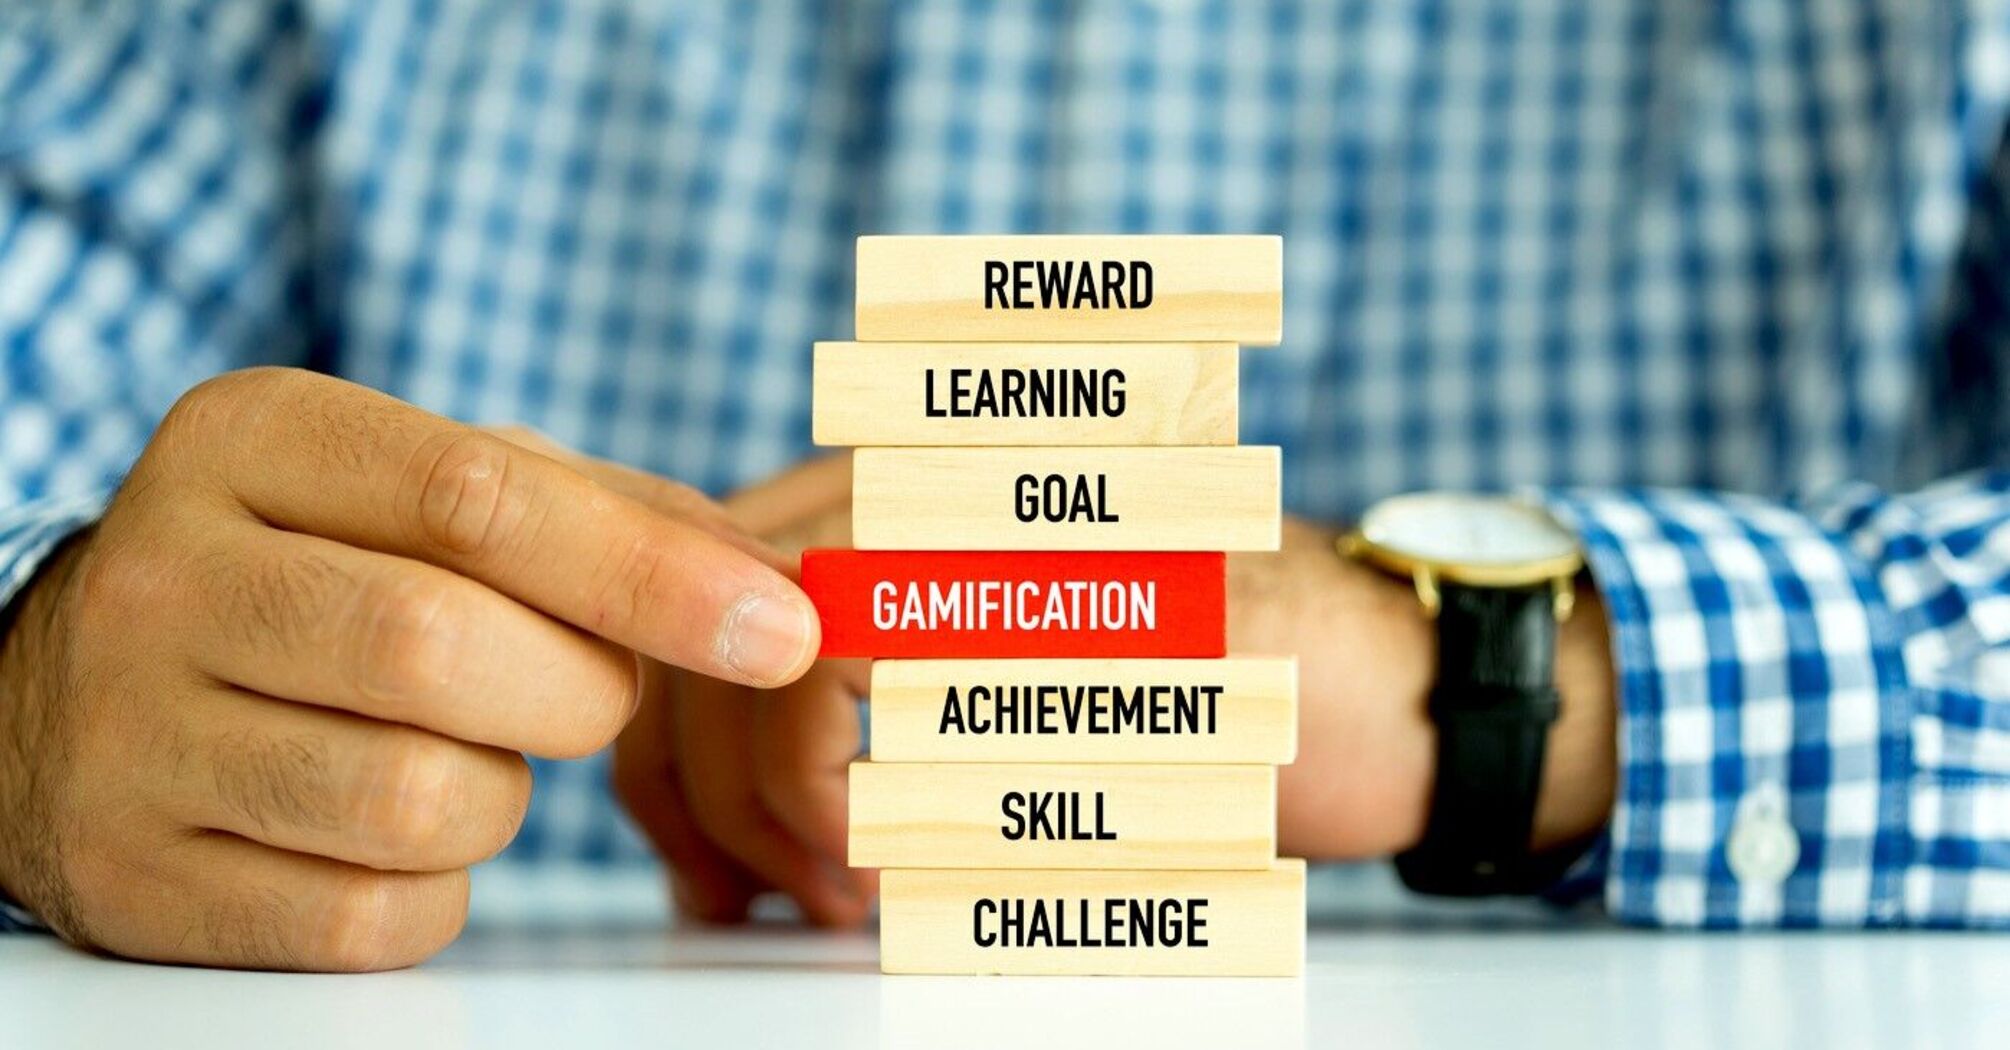 What are the advantages and disadvantages of gamification in education